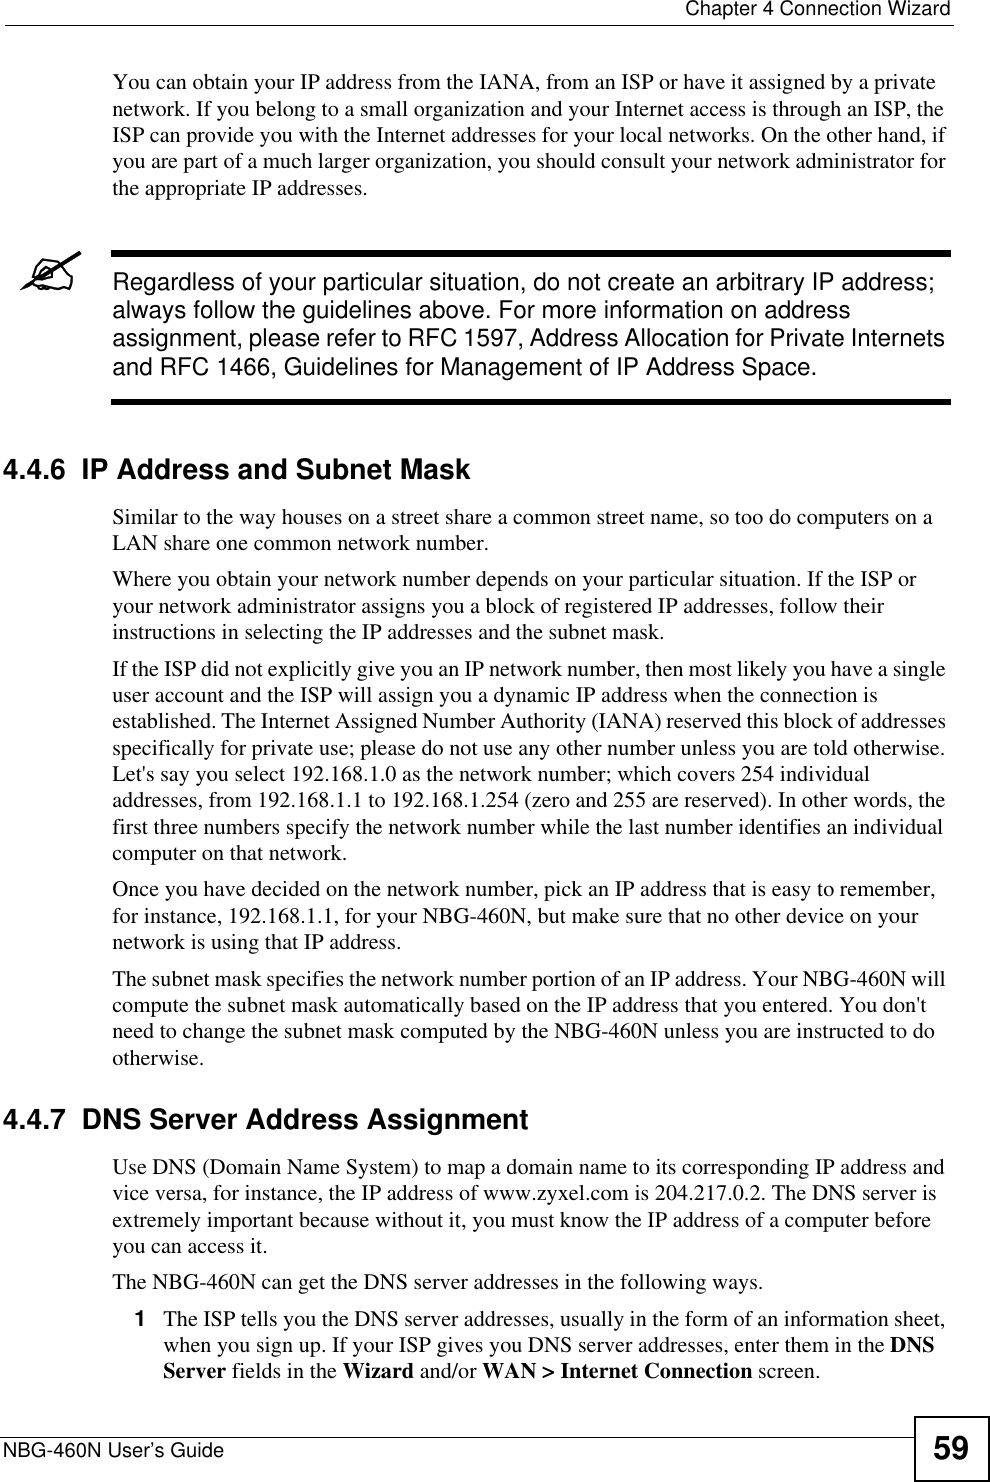  Chapter 4 Connection WizardNBG-460N User’s Guide 59You can obtain your IP address from the IANA, from an ISP or have it assigned by a private network. If you belong to a small organization and your Internet access is through an ISP, the ISP can provide you with the Internet addresses for your local networks. On the other hand, if you are part of a much larger organization, you should consult your network administrator for the appropriate IP addresses.&quot;Regardless of your particular situation, do not create an arbitrary IP address; always follow the guidelines above. For more information on address assignment, please refer to RFC 1597, Address Allocation for Private Internets and RFC 1466, Guidelines for Management of IP Address Space.4.4.6  IP Address and Subnet MaskSimilar to the way houses on a street share a common street name, so too do computers on a LAN share one common network number.Where you obtain your network number depends on your particular situation. If the ISP or your network administrator assigns you a block of registered IP addresses, follow their instructions in selecting the IP addresses and the subnet mask.If the ISP did not explicitly give you an IP network number, then most likely you have a single user account and the ISP will assign you a dynamic IP address when the connection is established. The Internet Assigned Number Authority (IANA) reserved this block of addresses specifically for private use; please do not use any other number unless you are told otherwise. Let&apos;s say you select 192.168.1.0 as the network number; which covers 254 individual addresses, from 192.168.1.1 to 192.168.1.254 (zero and 255 are reserved). In other words, the first three numbers specify the network number while the last number identifies an individual computer on that network.Once you have decided on the network number, pick an IP address that is easy to remember, for instance, 192.168.1.1, for your NBG-460N, but make sure that no other device on your network is using that IP address.The subnet mask specifies the network number portion of an IP address. Your NBG-460N will compute the subnet mask automatically based on the IP address that you entered. You don&apos;t need to change the subnet mask computed by the NBG-460N unless you are instructed to do otherwise.4.4.7  DNS Server Address AssignmentUse DNS (Domain Name System) to map a domain name to its corresponding IP address and vice versa, for instance, the IP address of www.zyxel.com is 204.217.0.2. The DNS server is extremely important because without it, you must know the IP address of a computer before you can access it. The NBG-460N can get the DNS server addresses in the following ways.1The ISP tells you the DNS server addresses, usually in the form of an information sheet, when you sign up. If your ISP gives you DNS server addresses, enter them in the DNSServer fields in the Wizard and/or WAN &gt; Internet Connection screen.